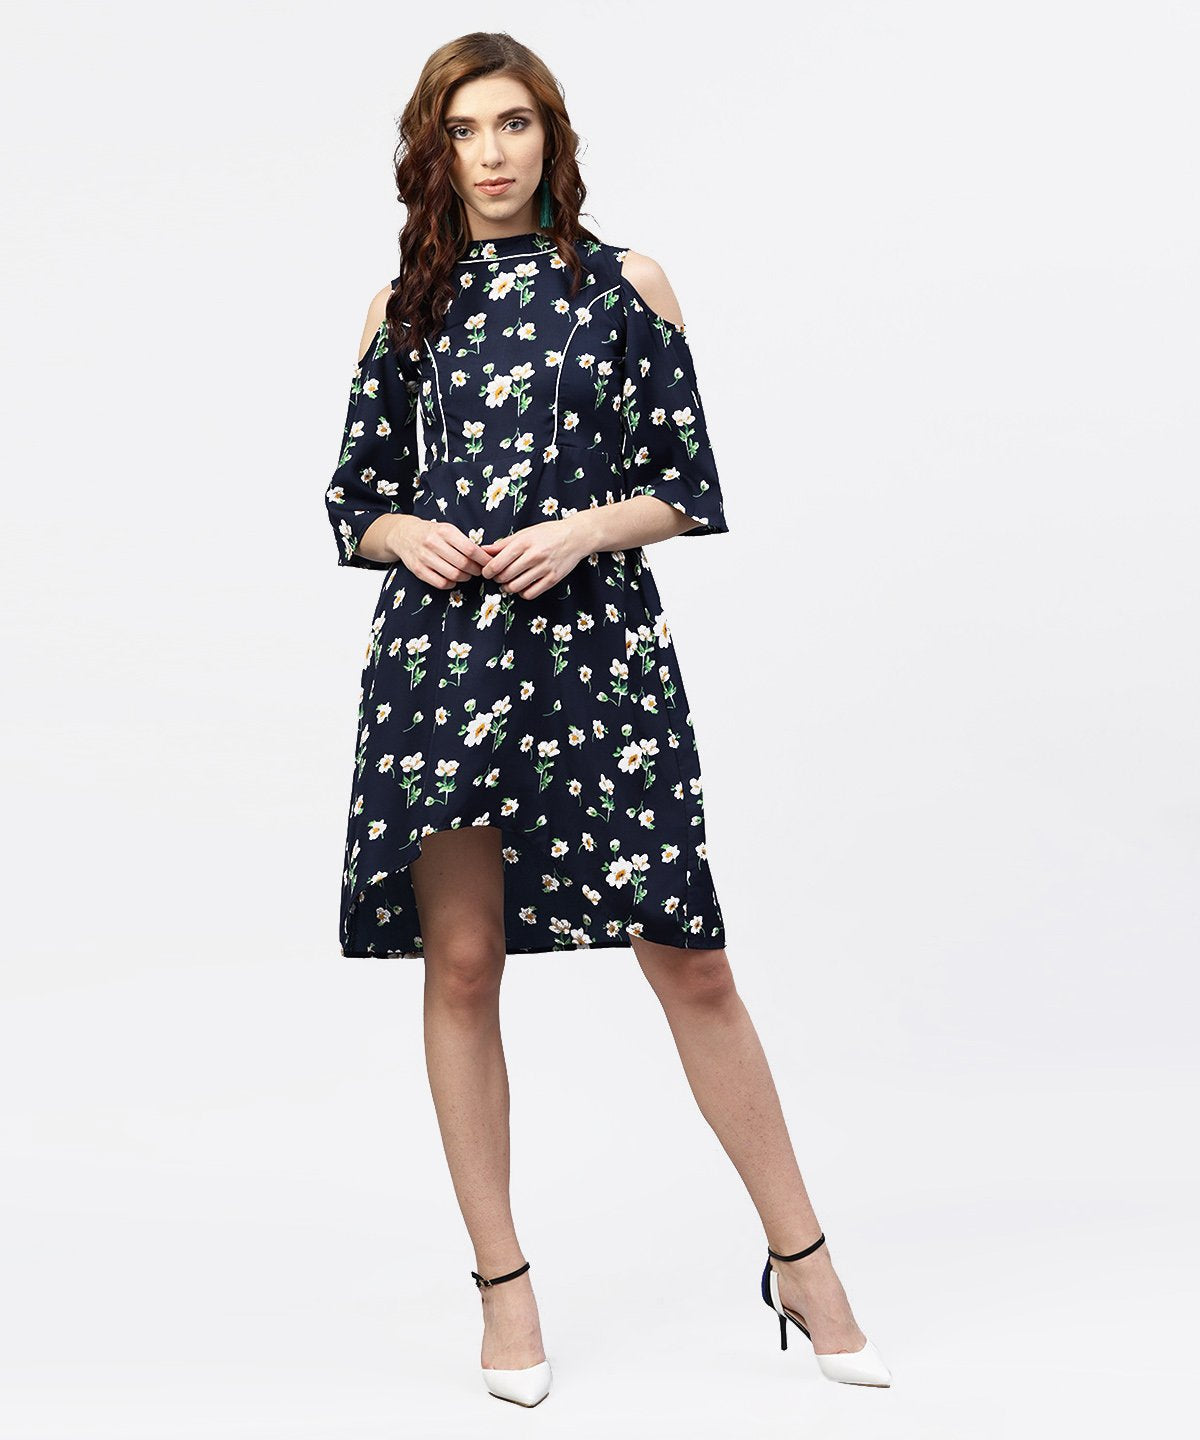 Women's Navy Blue Printed Dress With Round Neck And Cold Shoulders Sleeves - Nayo Clothing